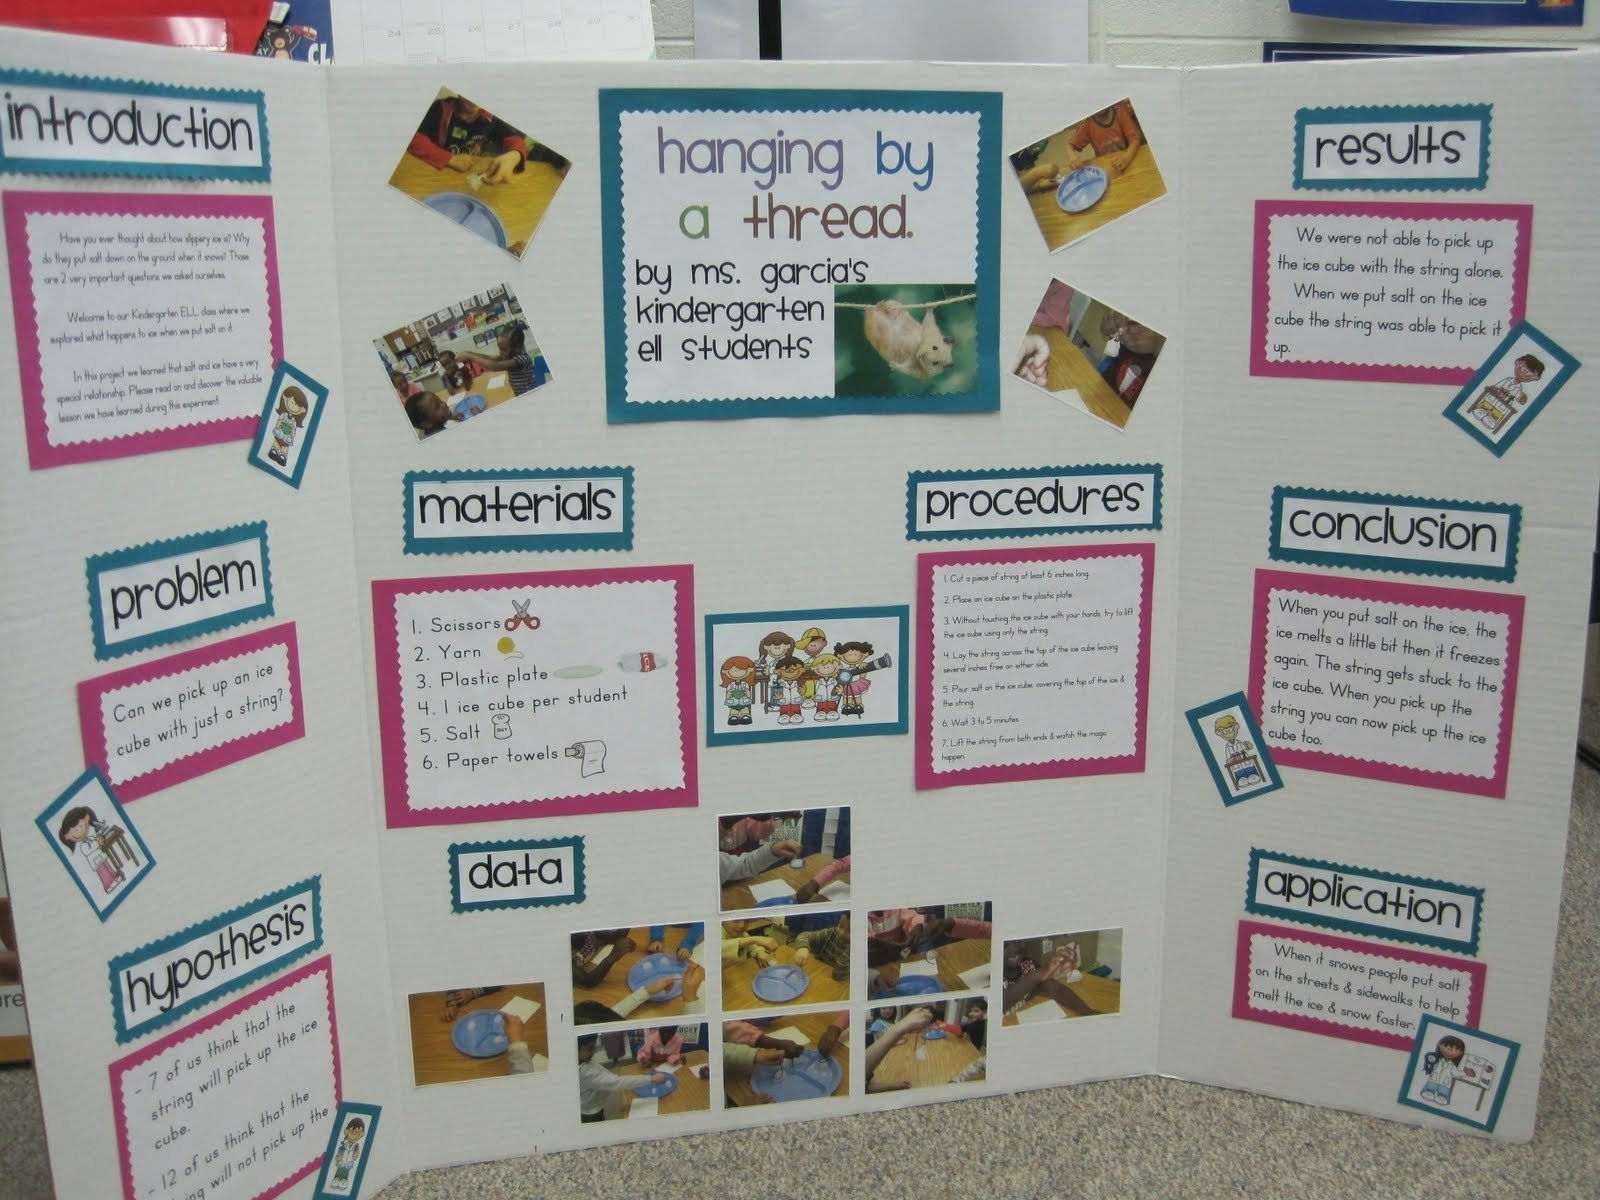 research projects for kindergarten